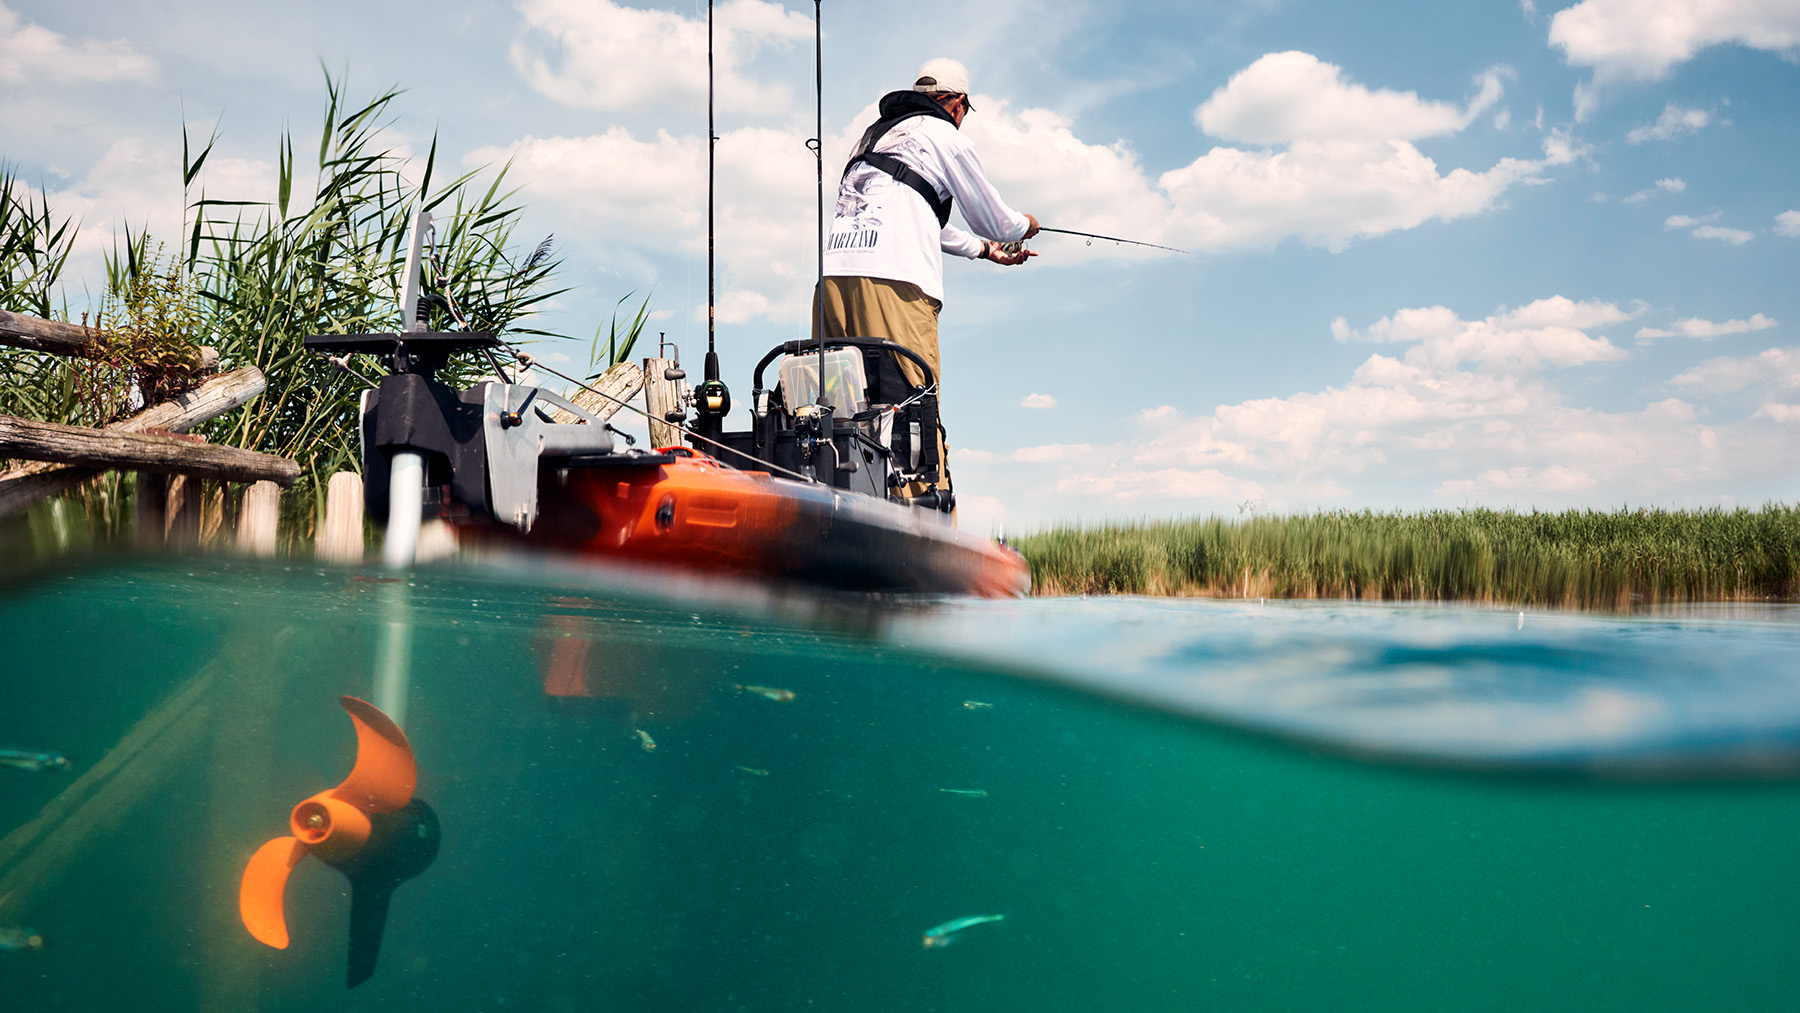 Torqeedo Blog - Follow the fish - e-mobility on the water